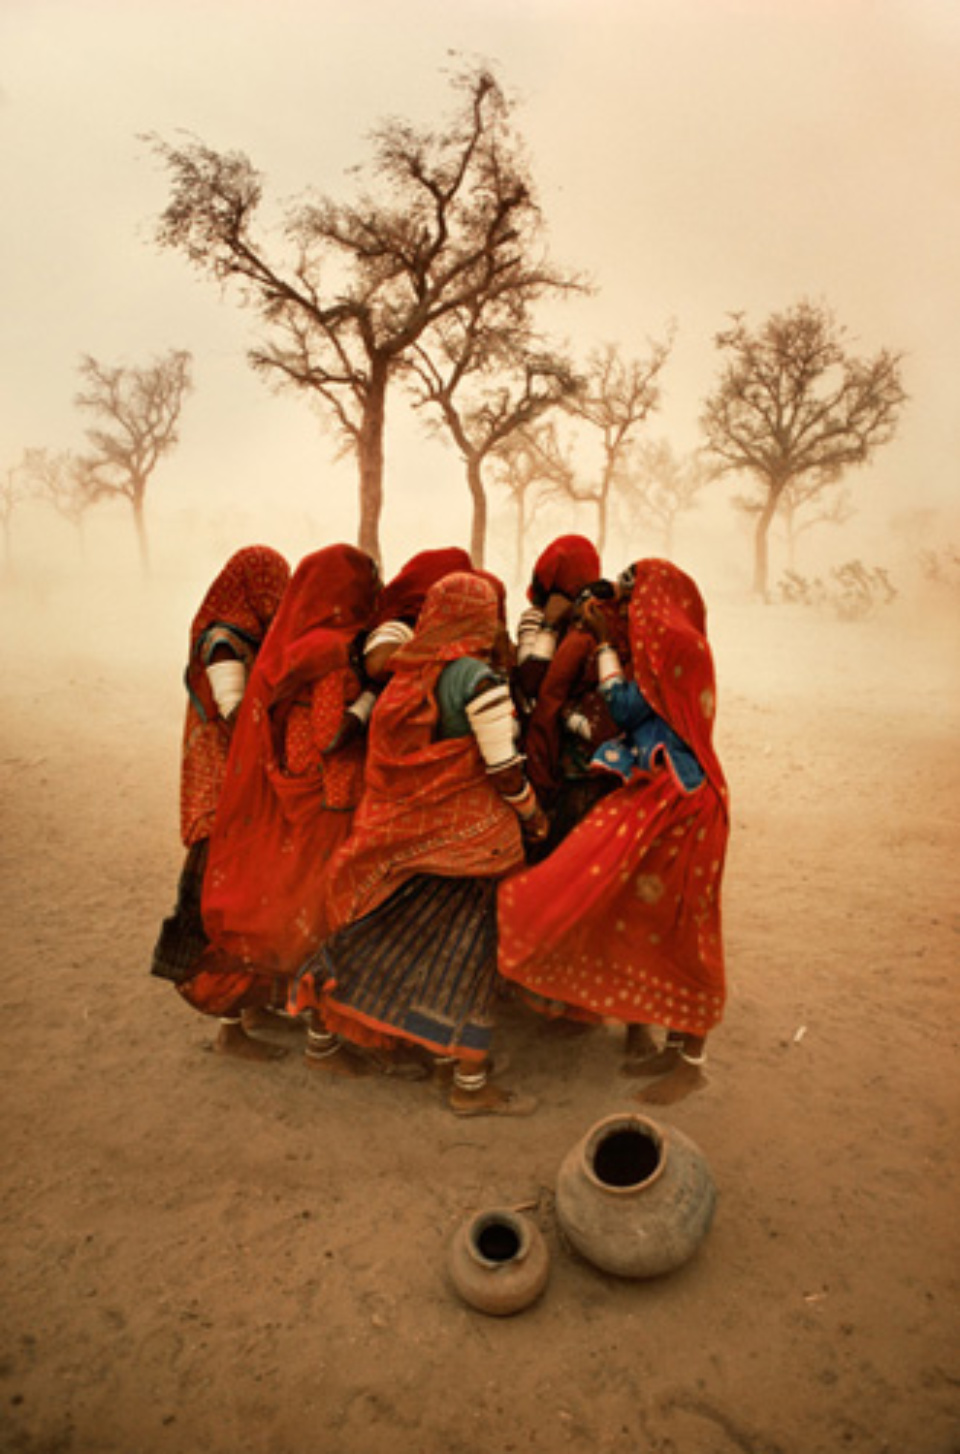 Steve McCurry: Dust Storm Rajasthan, India, 1983 Signed, titled, dated and numbered on verso C-print 60 x 50 cm // 152 x 101 cm Editioned